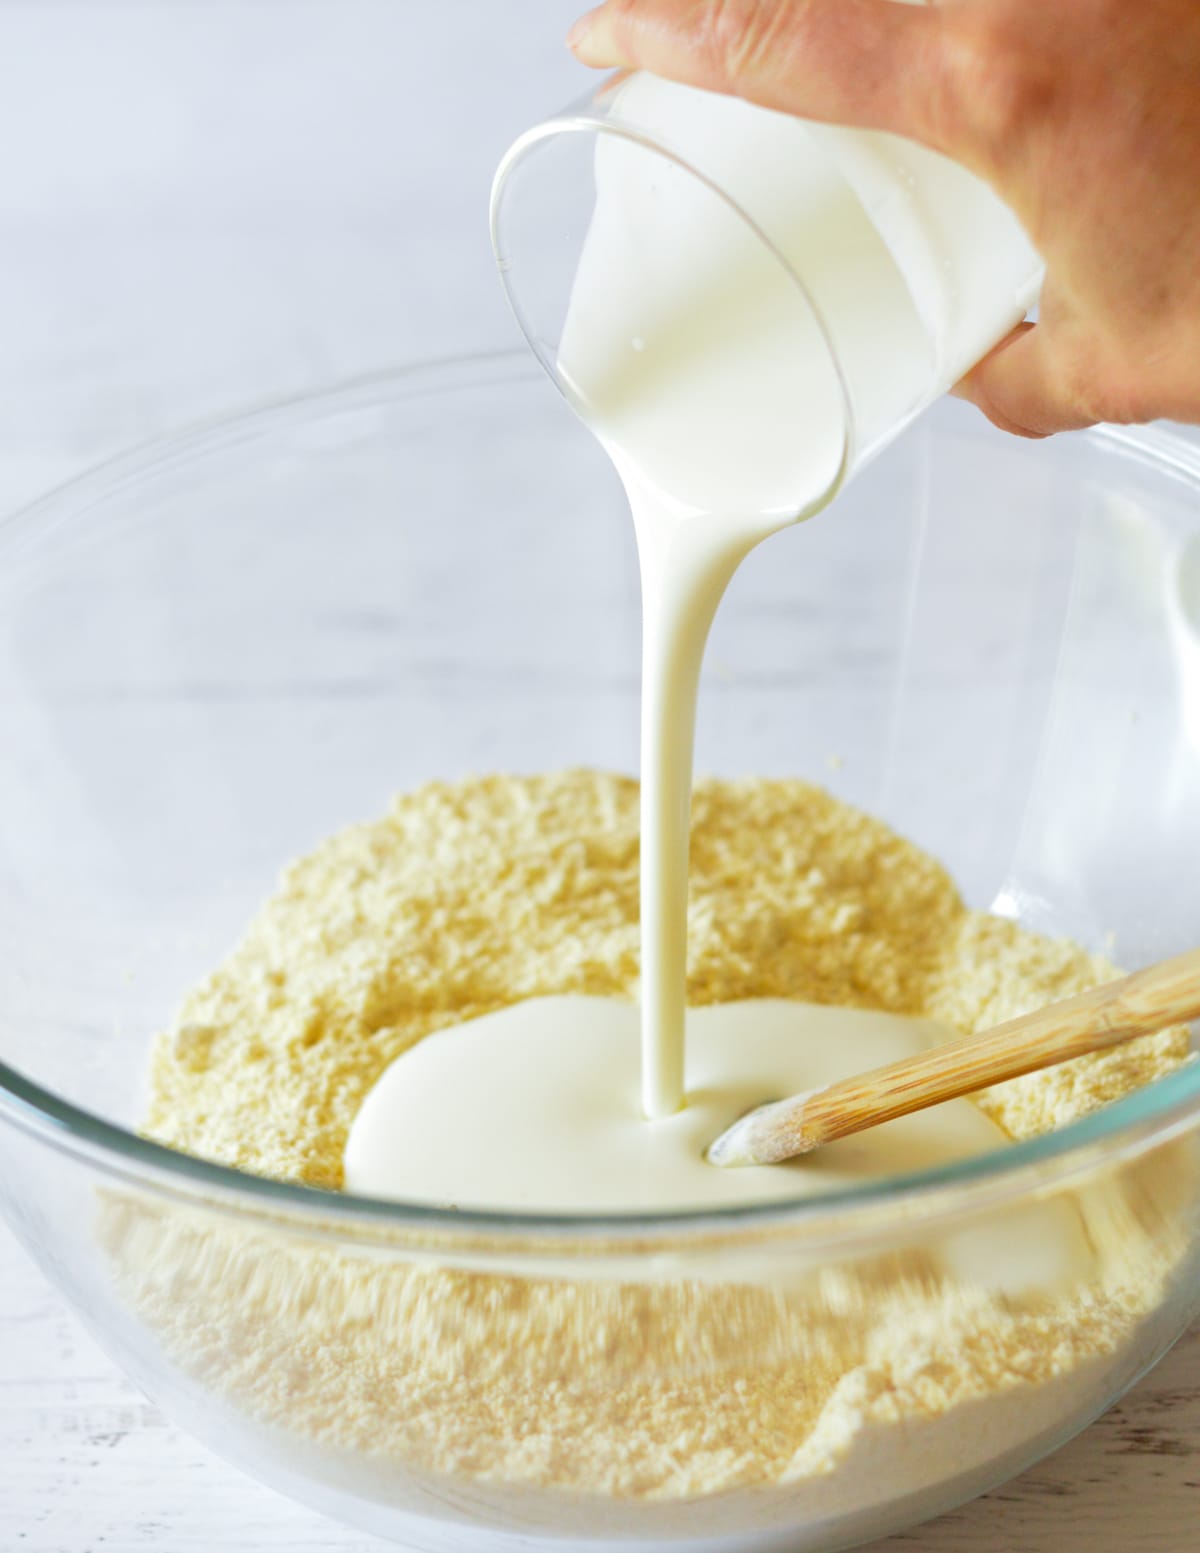 hand pouring buttermilk into a bowl with cornmeal